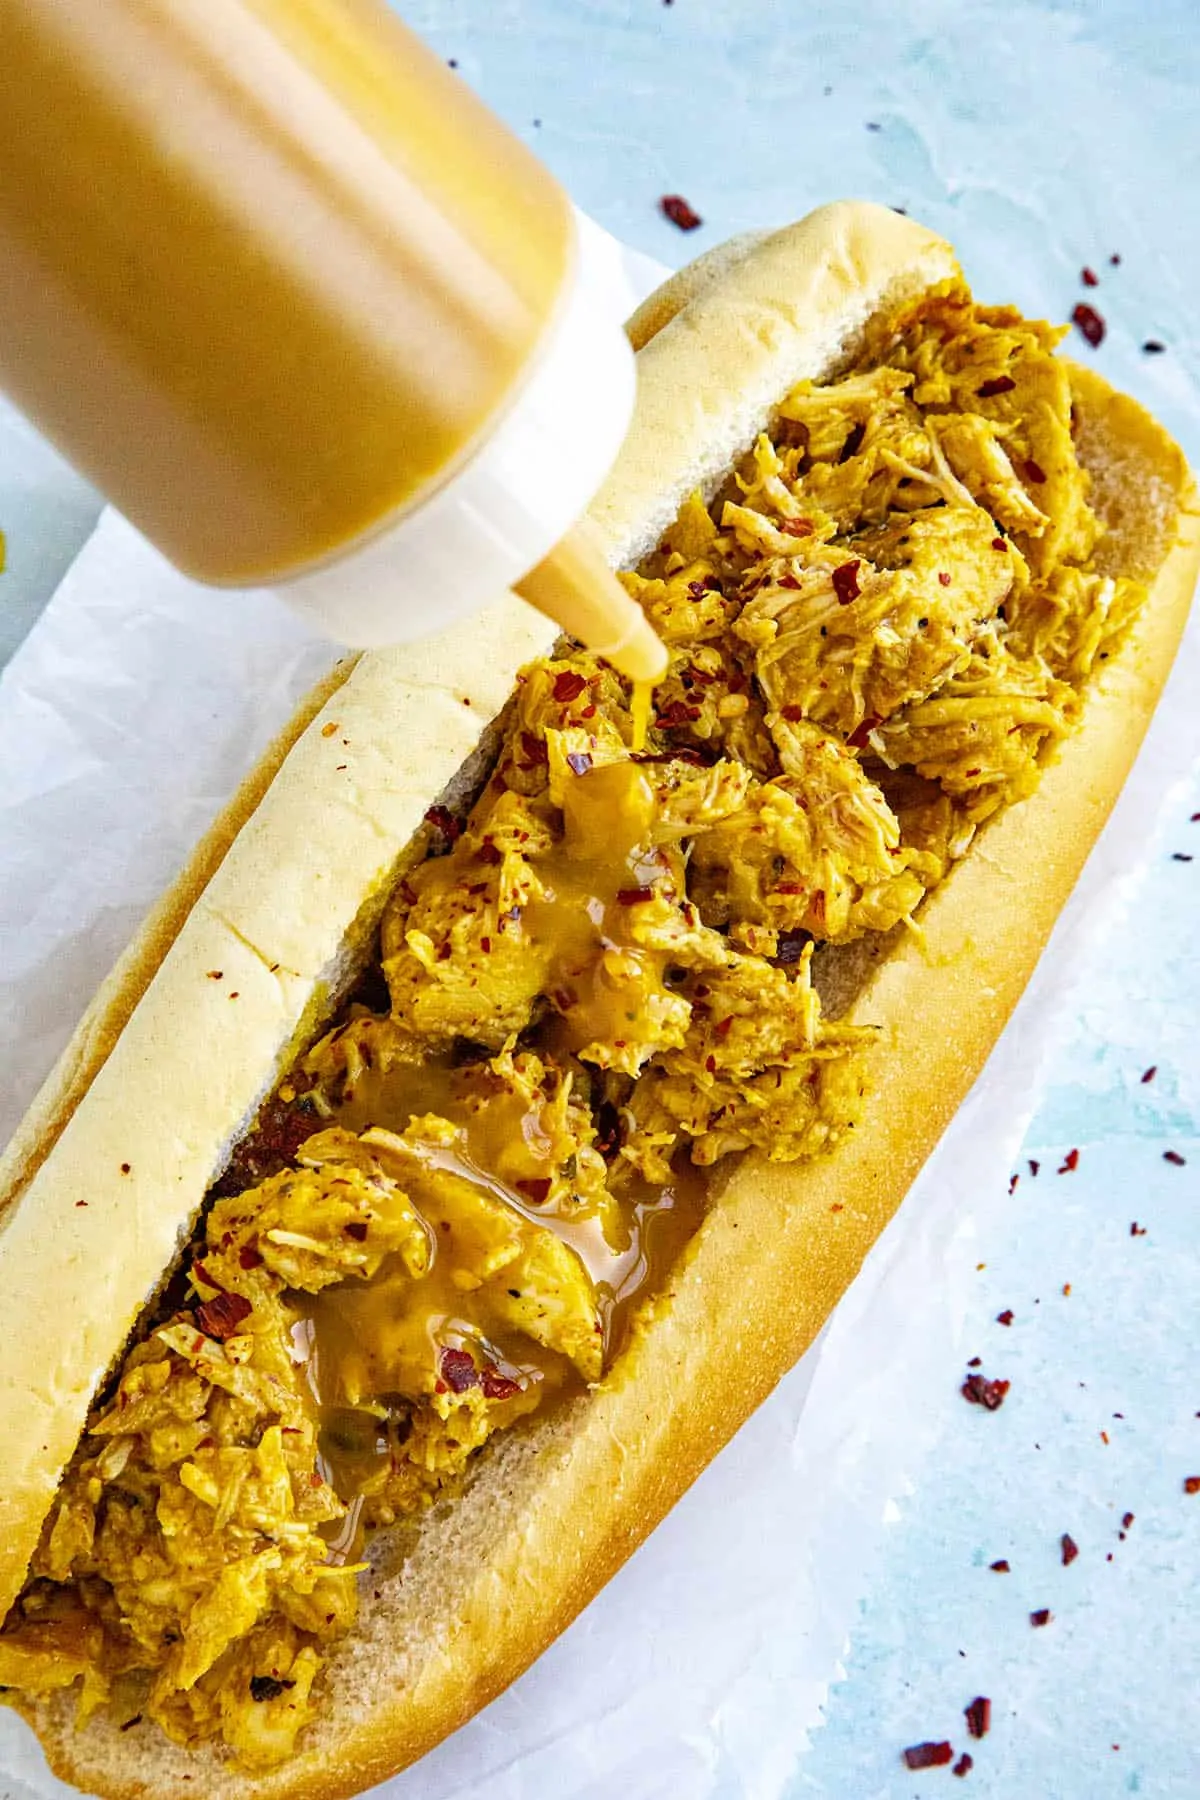 Carolina Mustard BBQ Sauce being squirted onto a pulled chicken sandwich